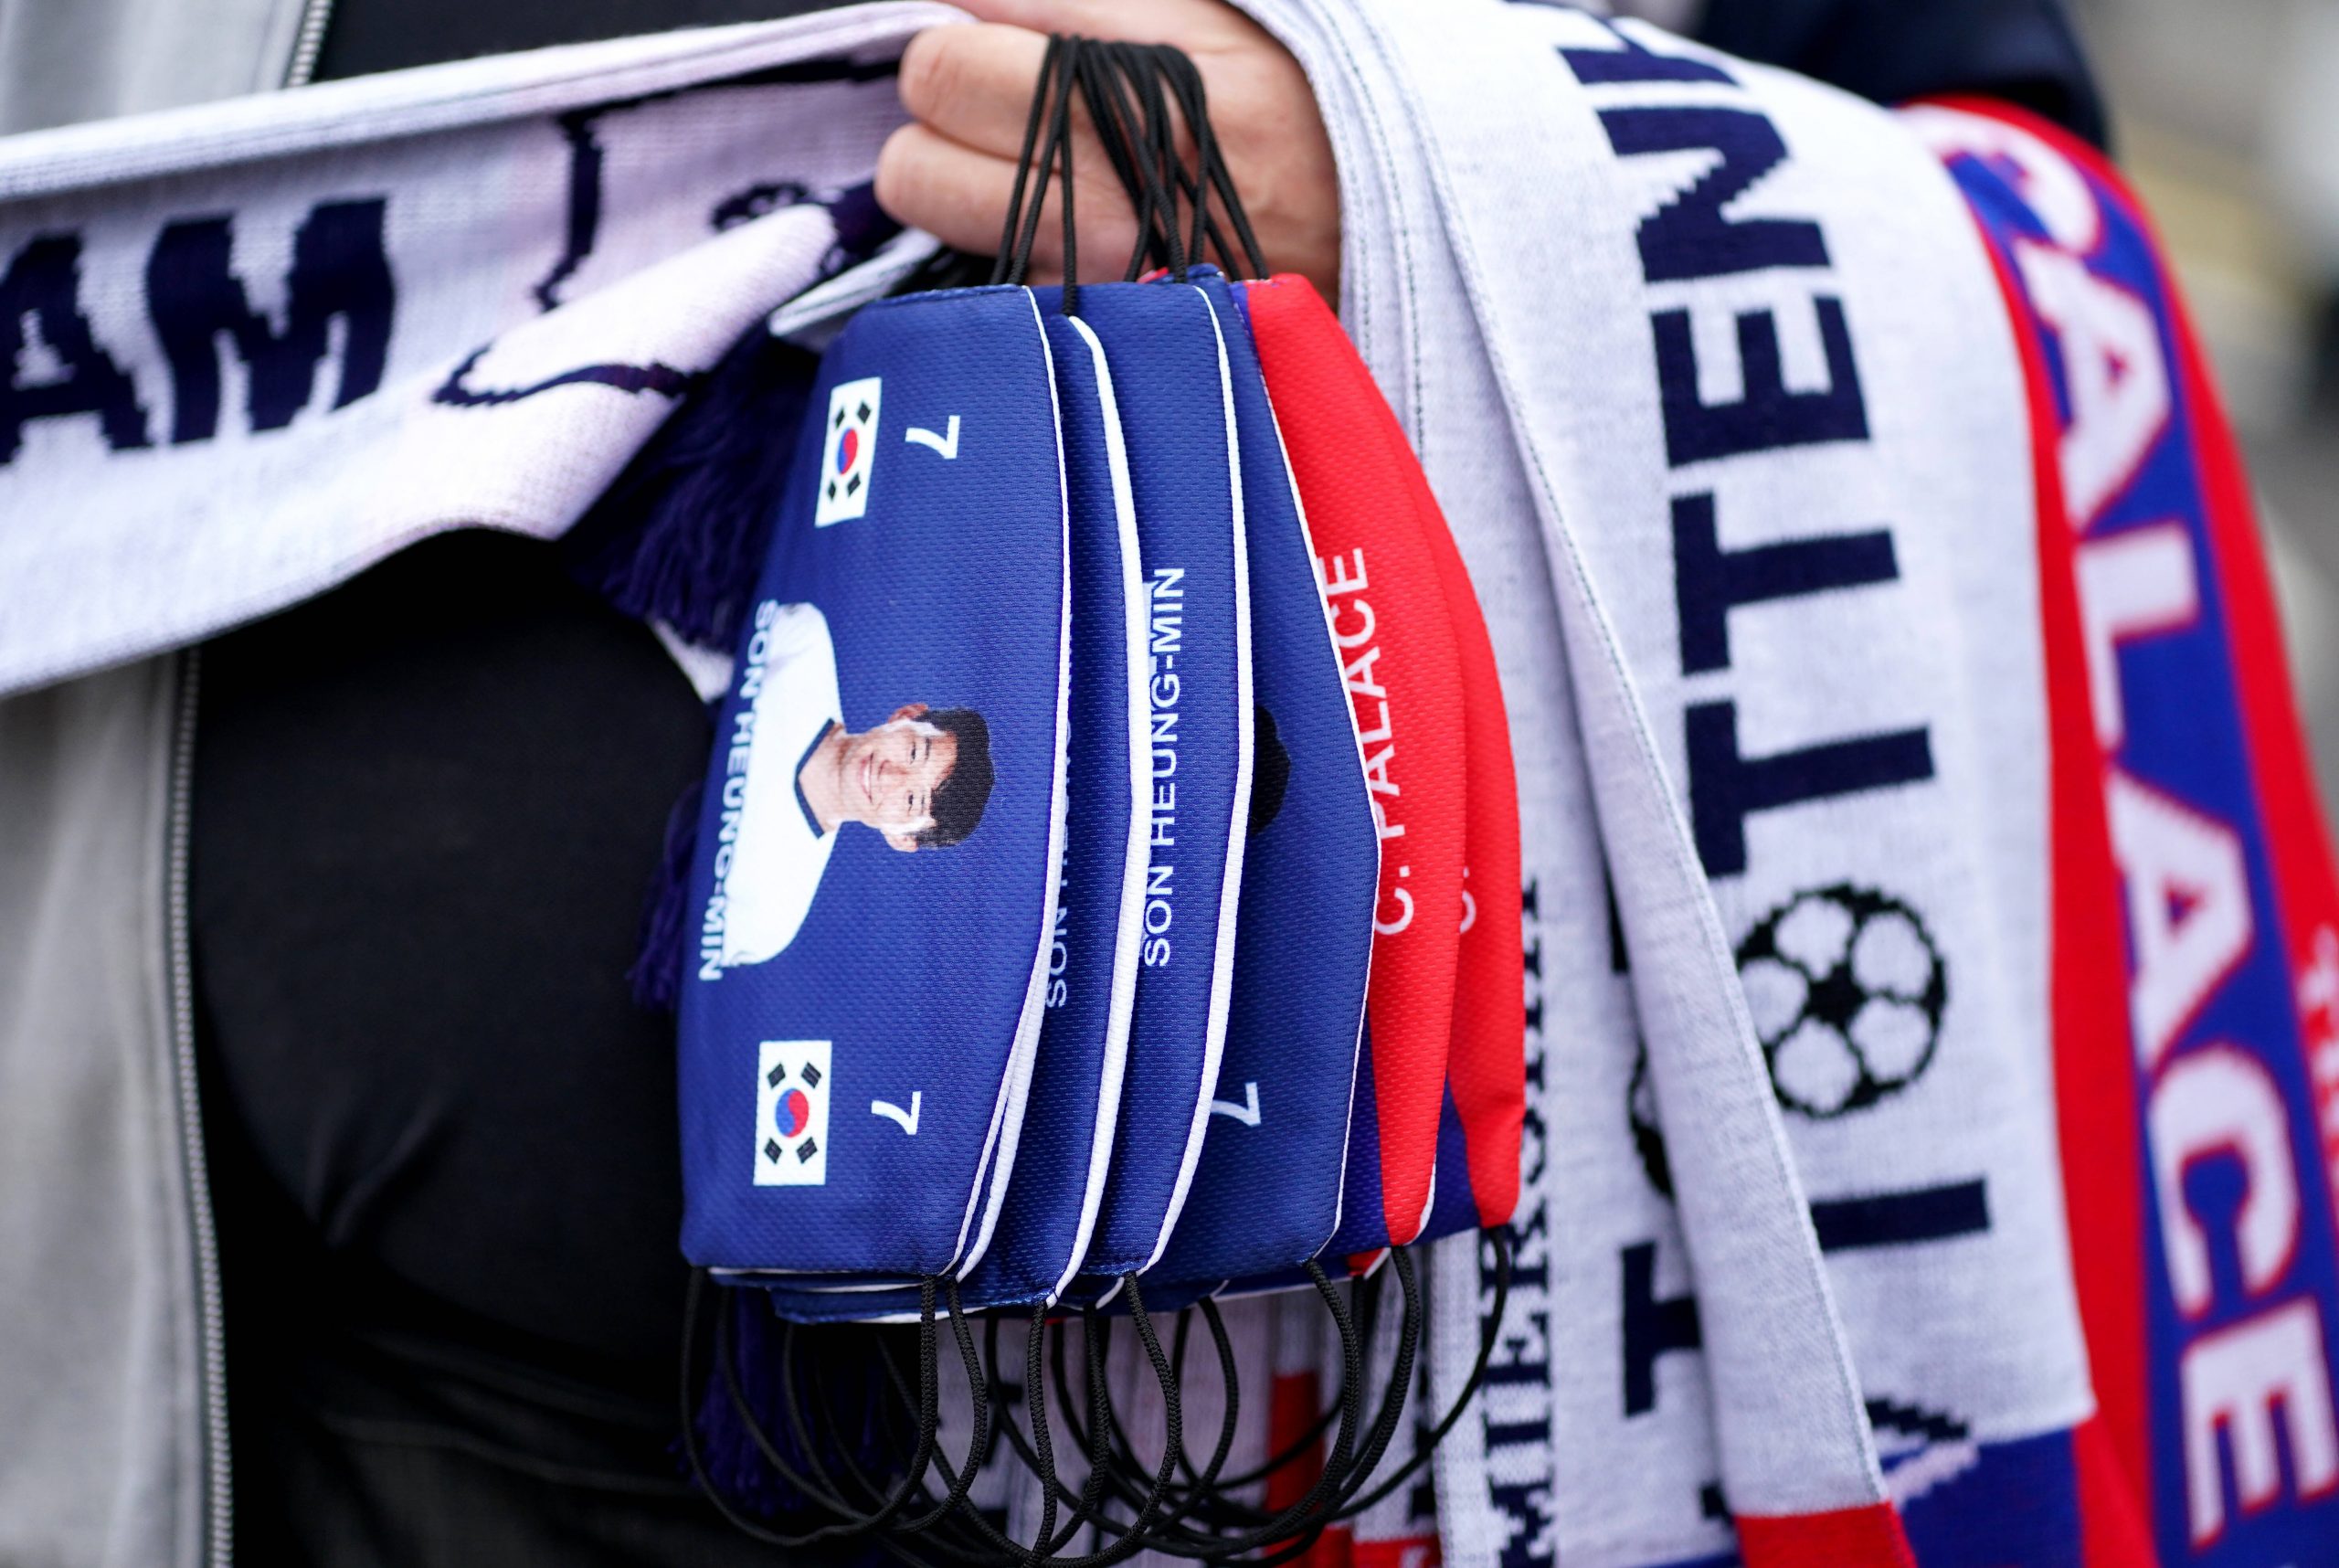 Crystal Palace v Tottenham Hotspur - Premier League - Selhurst Park face masks of Tottenham Hotspur s Son Heung-min for sale before the Premier League match at Selhurst Park, London. Picture date: Saturday September 11, 2021. EDITORIAL USE ONLY No use with unauthorised audio, video, data, fixture lists, club/league logos or live services. Online in-match use limited to 120 images, no video emulation. No use in betting, games or single club/league/player publications. PUBLICATIONxINxGERxSUIxAUTxONLY Copyright: xAdamxDavyx 62335819